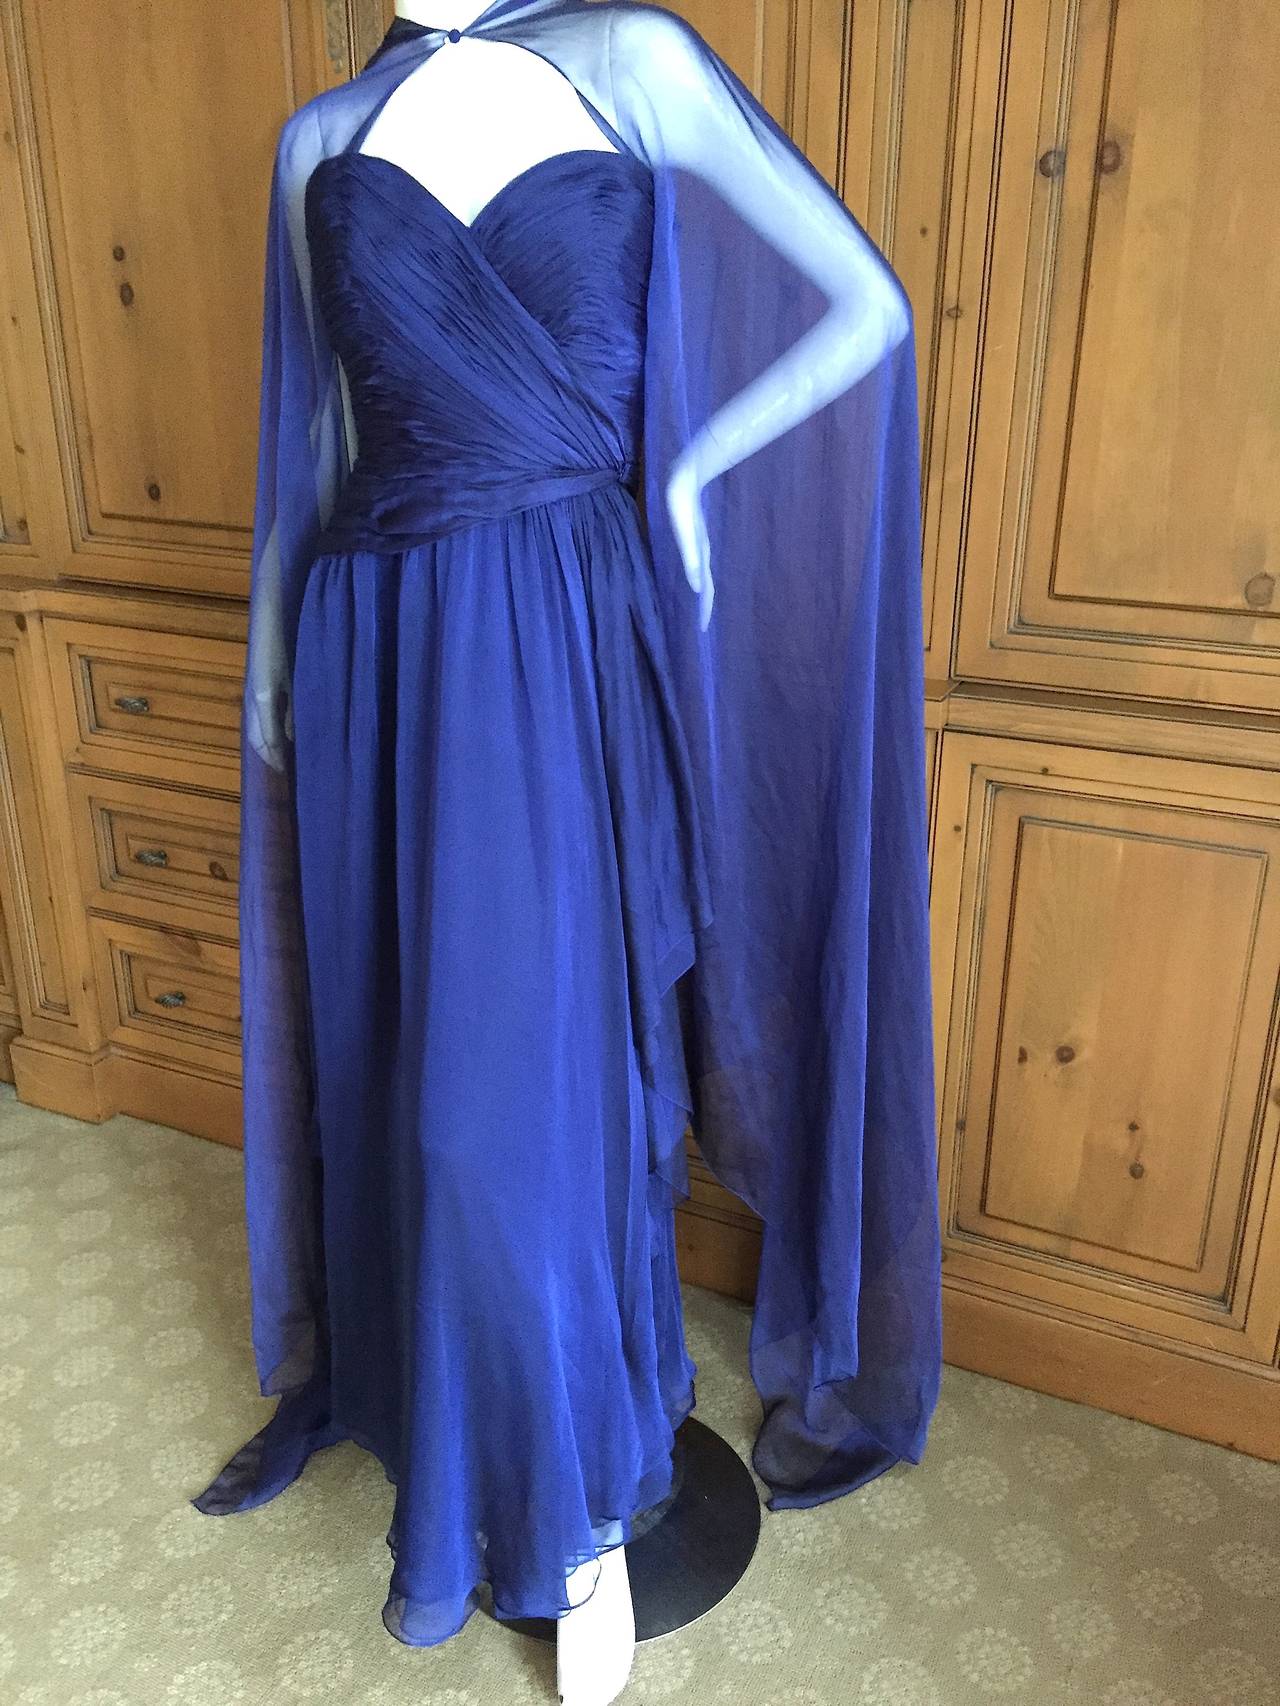 Beautiful irridescent midnight blue silk chiffon ruched strapless dress with matching cape, from Oscar de la Renta for Amen Wardy circa 1980.
This is such a pretty piece, the photos don't quite capture its charms.
Featuring a full interior corset,